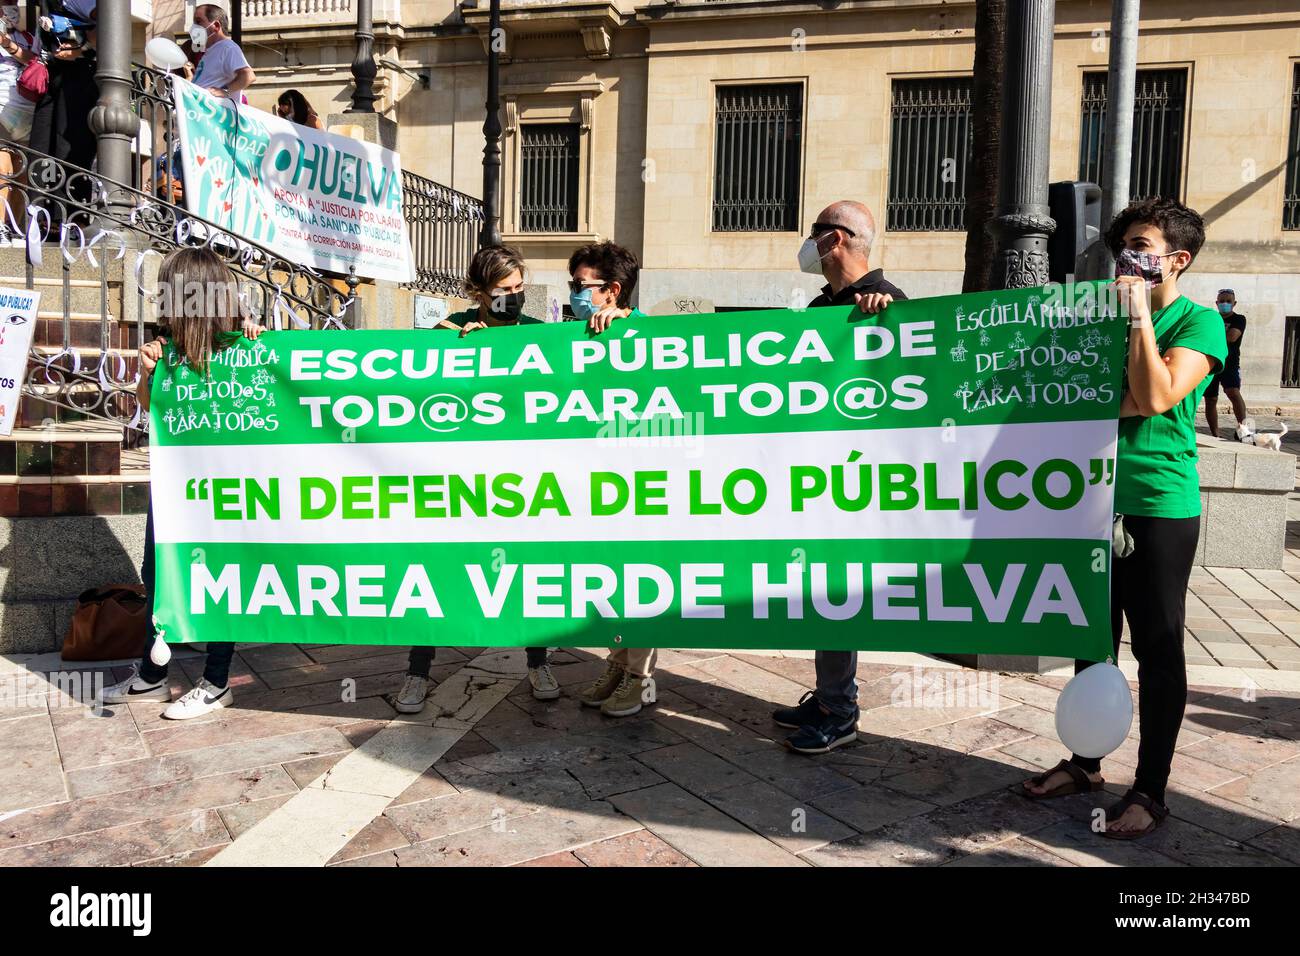 Huelva, Spain - October 24, 2021: Banner in defense of public school and all public services Stock Photo